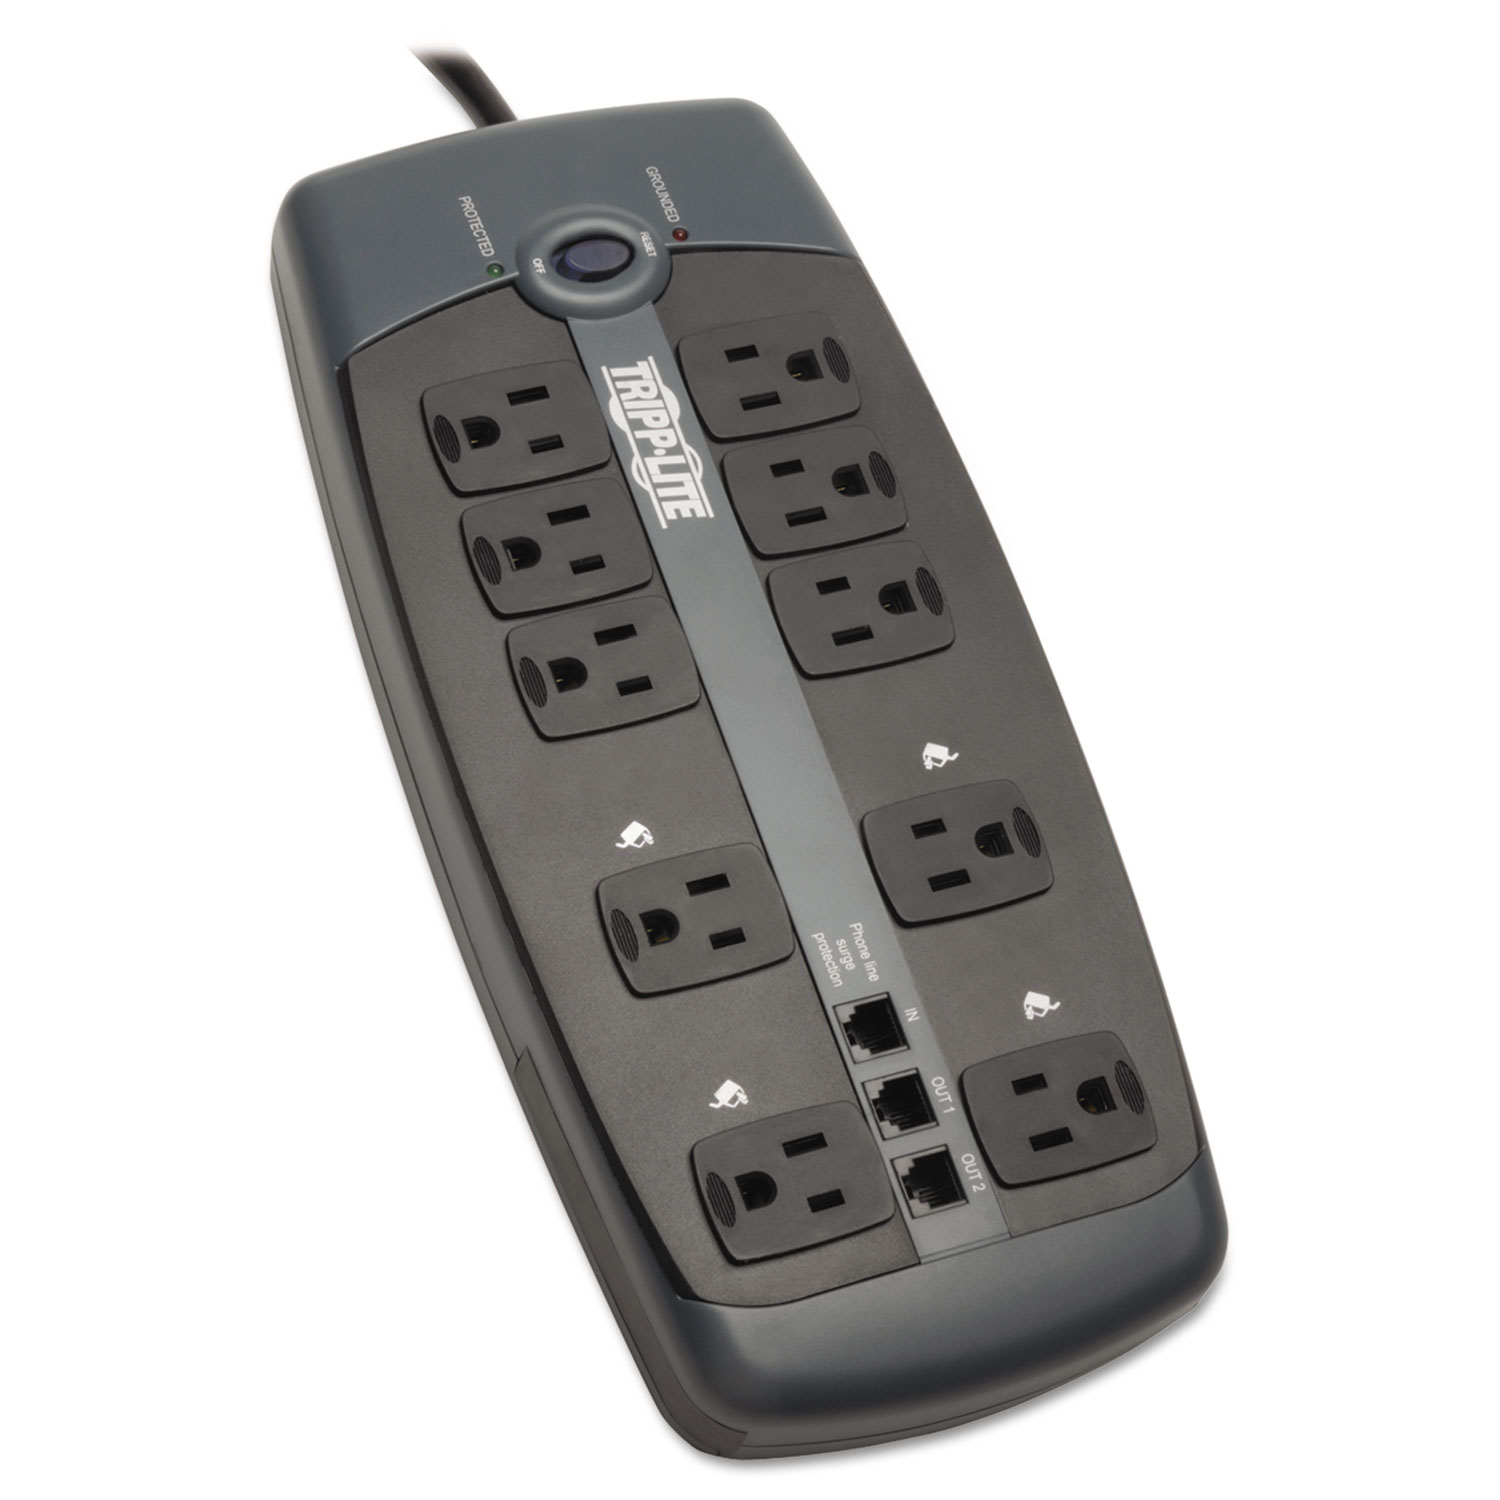  Tripp Lite TLP1008TEL Protect It! Surge Protector, 10 Outlets, 8 ft. Cord, 2395 Joules, Black (TRPTLP1008TEL) 